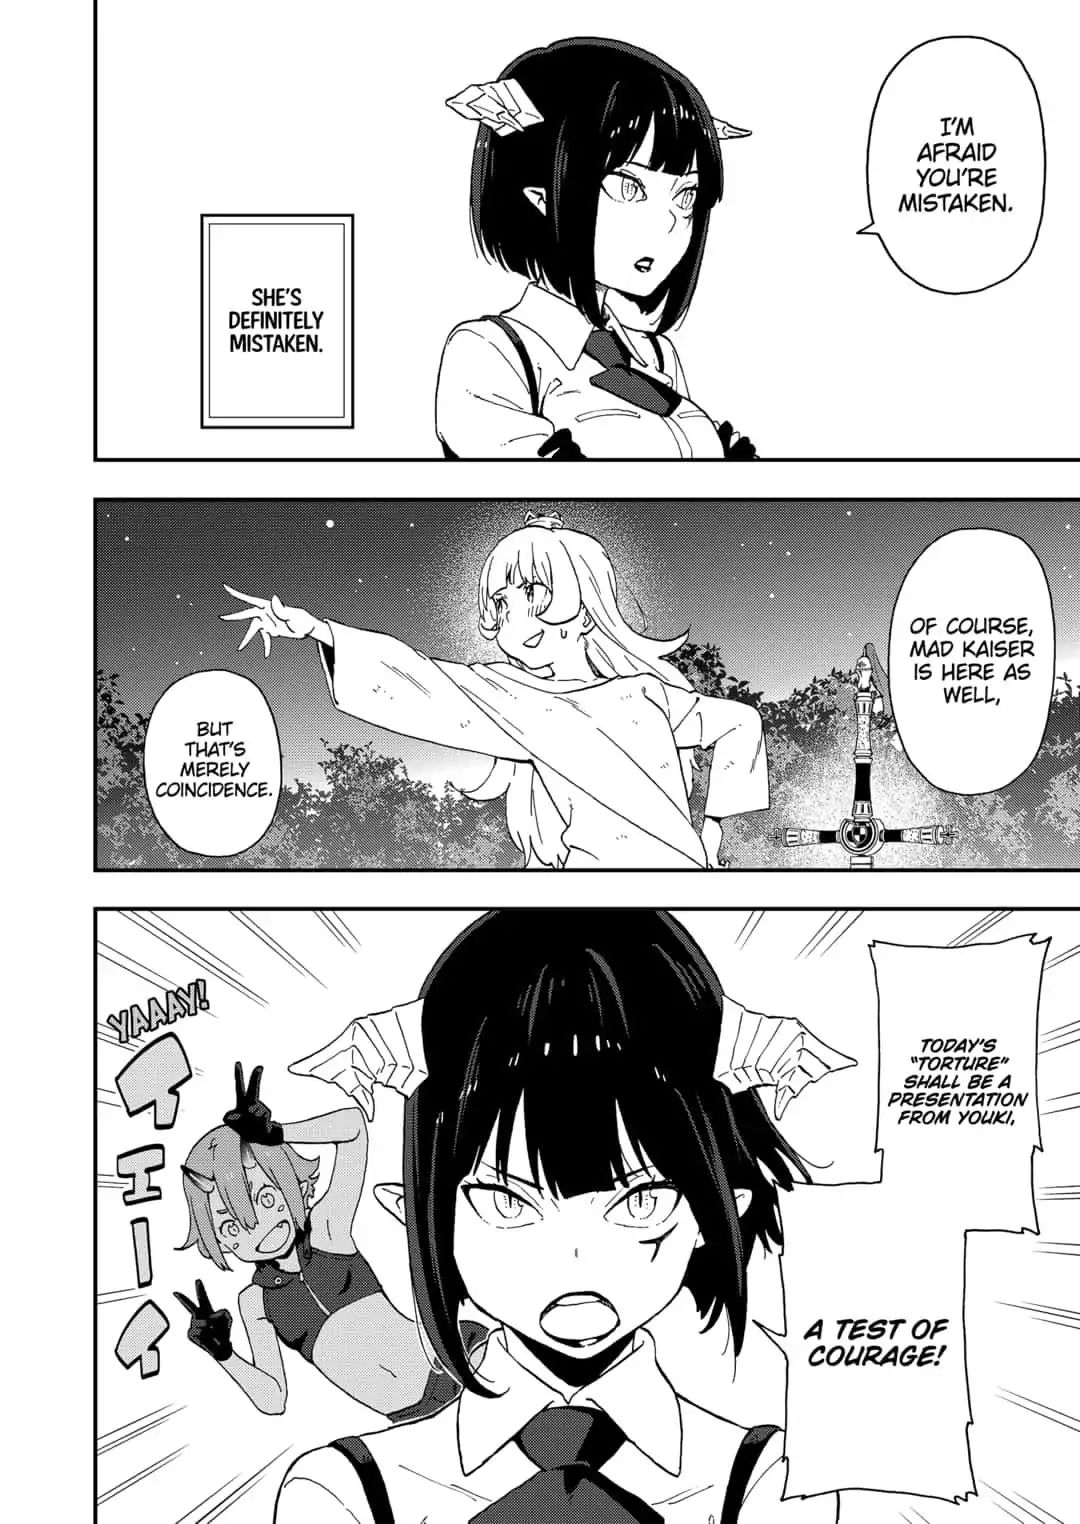 It's Time for "Interrogation", Princess! - chapter 26 - #4